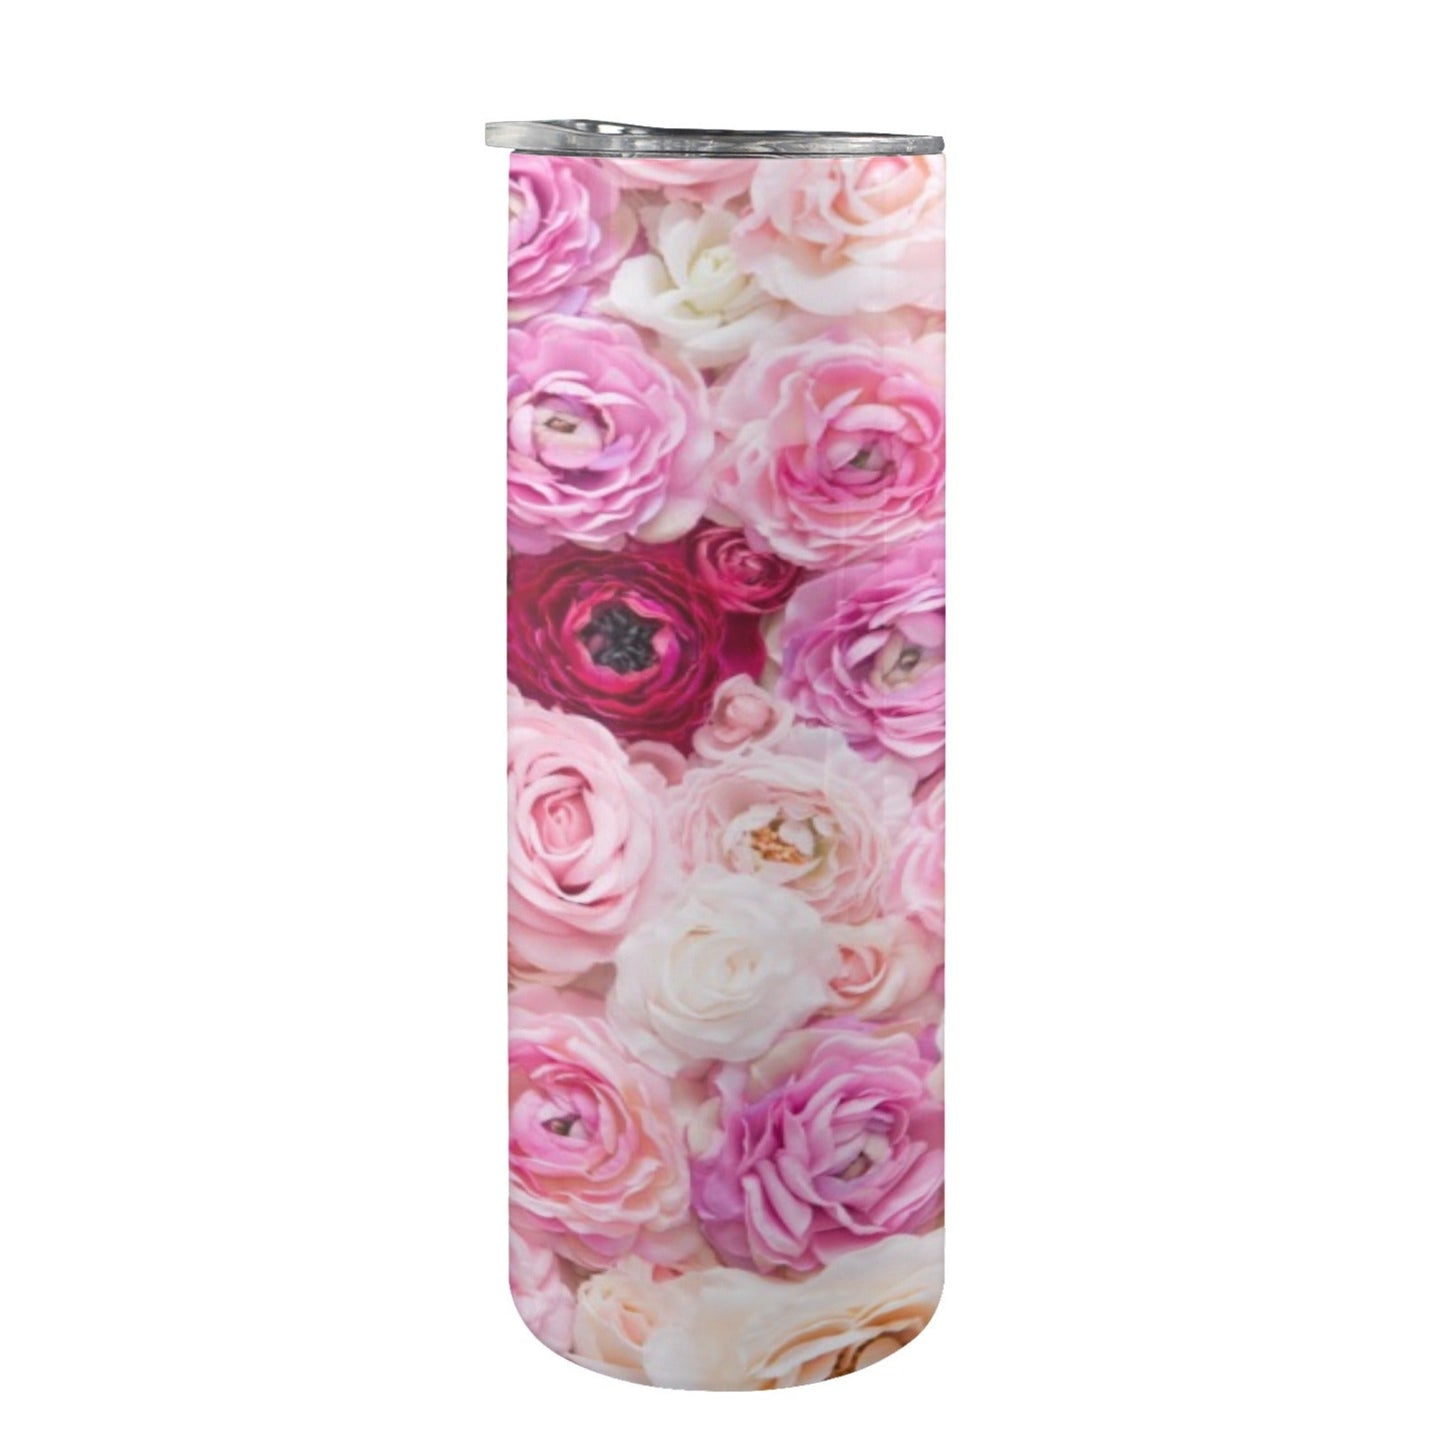 Pink Flowers - 20oz Tall Skinny Tumbler with Lid and Straw 20oz Tall Skinny Tumbler with Lid and Straw